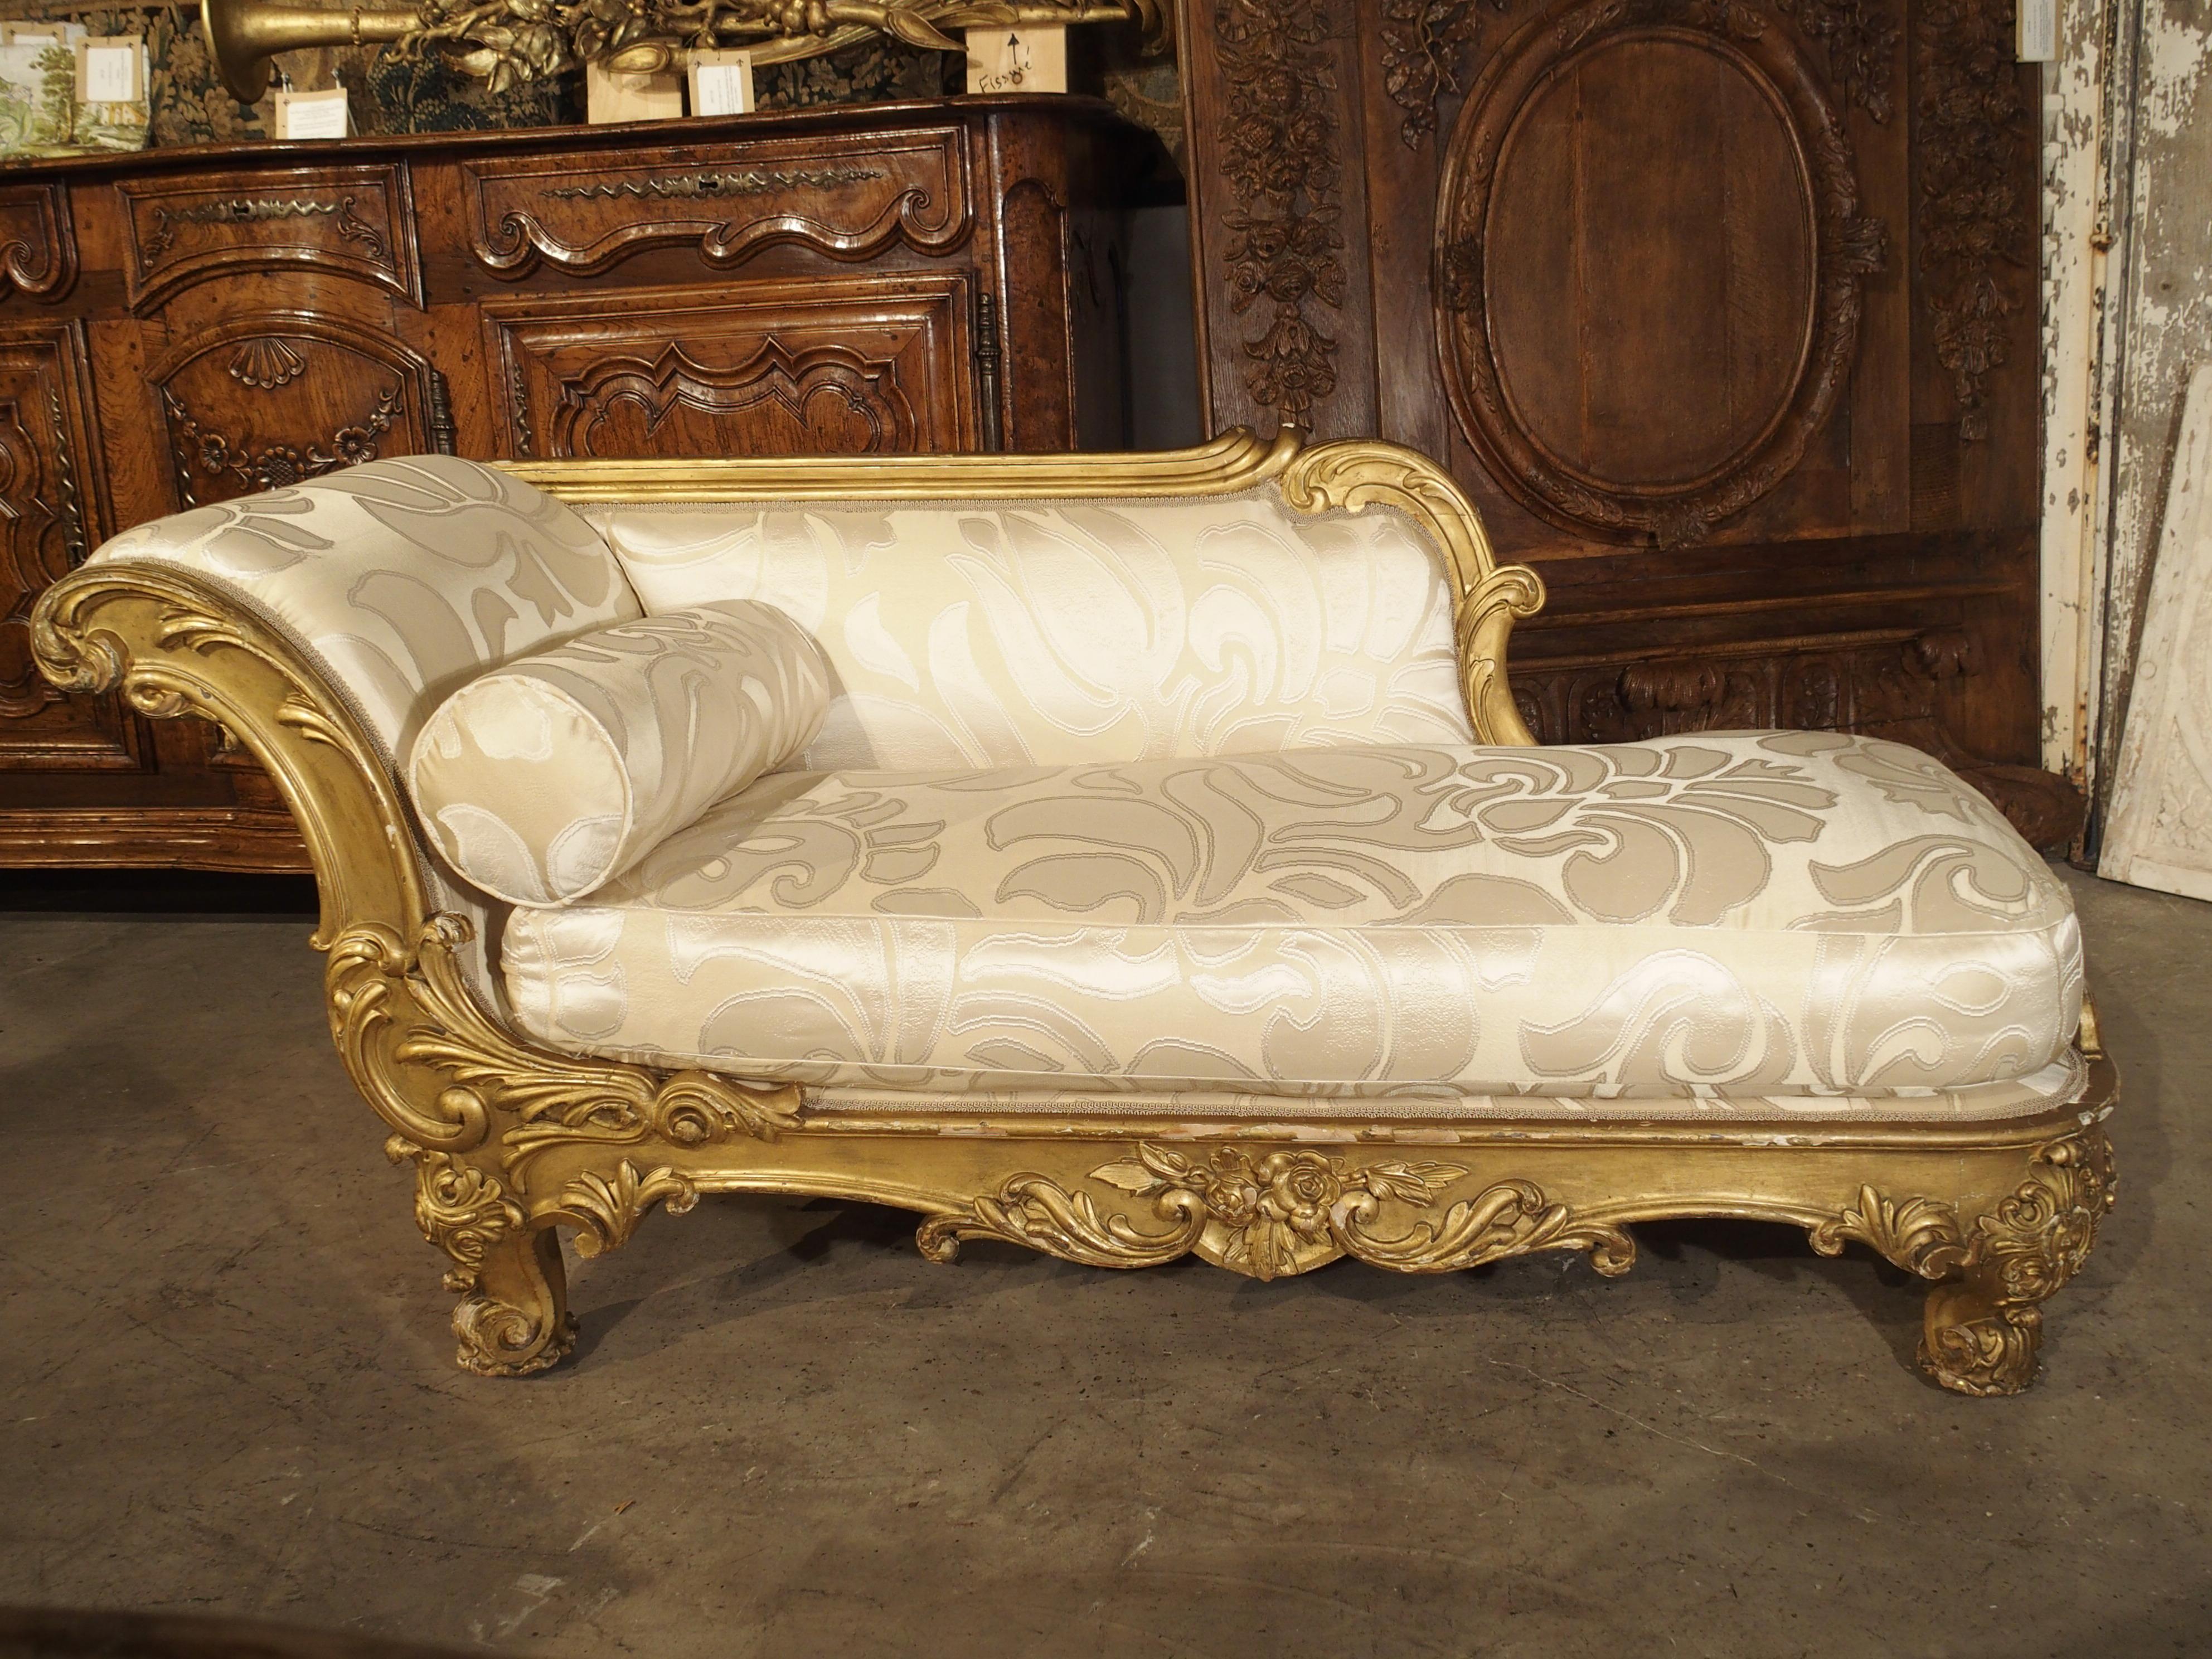 19th Century French Giltwood Chaise Lounge Upholstered in Bergamo Silk 2